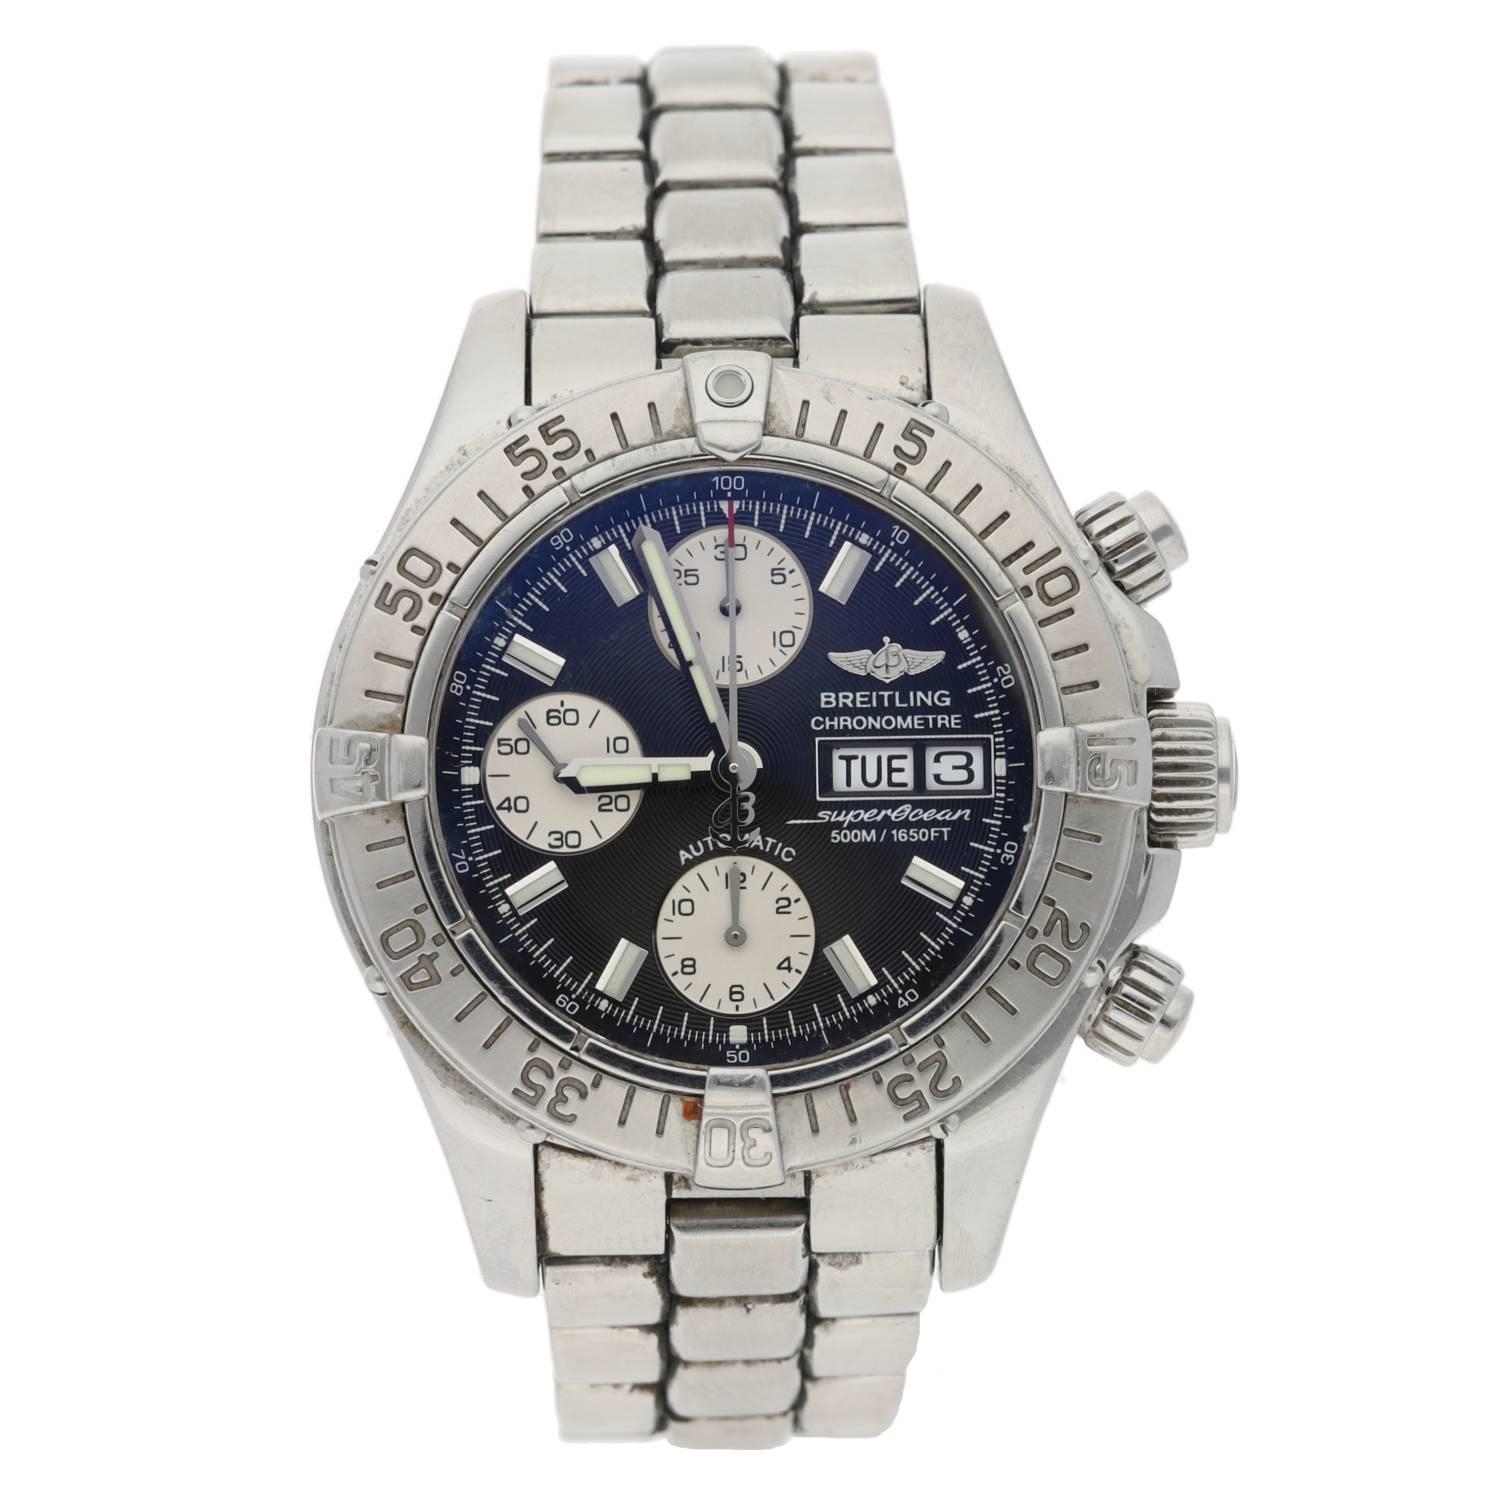 Breitling SuperOcean Chronometre Chronograph automatic stainless steel gentleman's wristwatch,